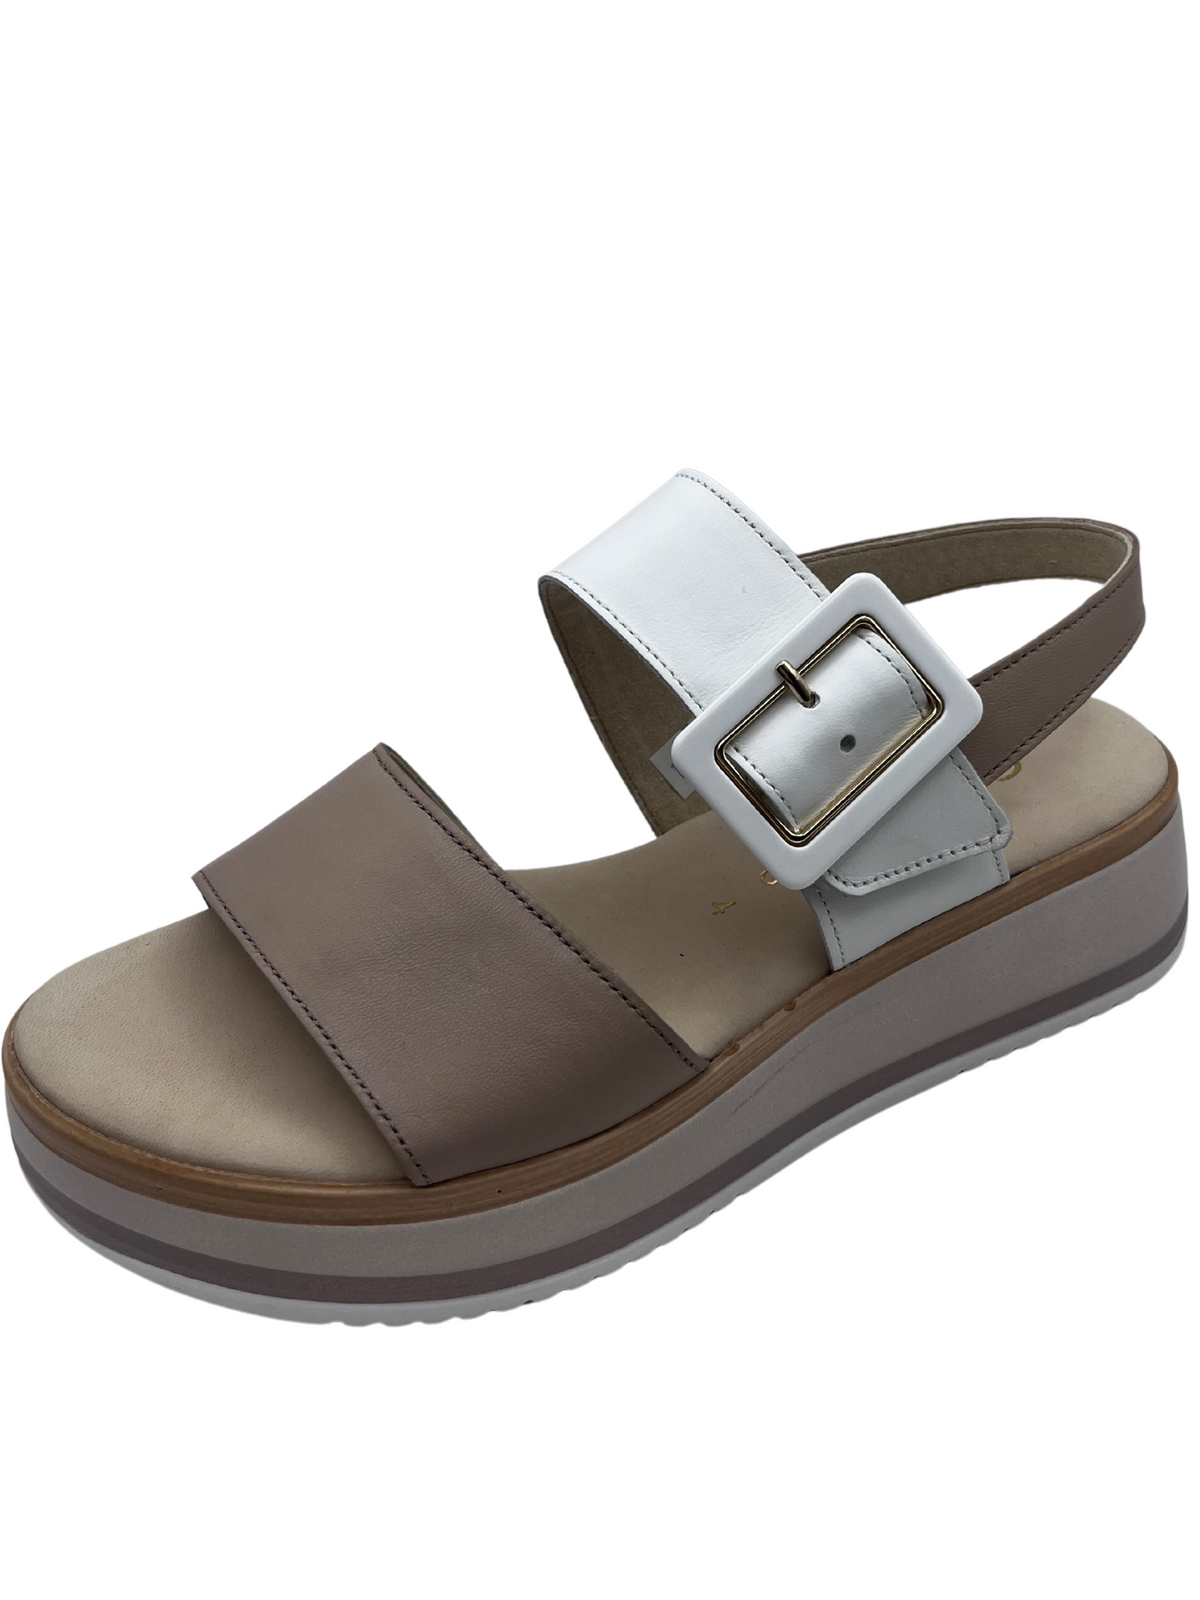 Gabor White And Nude Leather Sandals